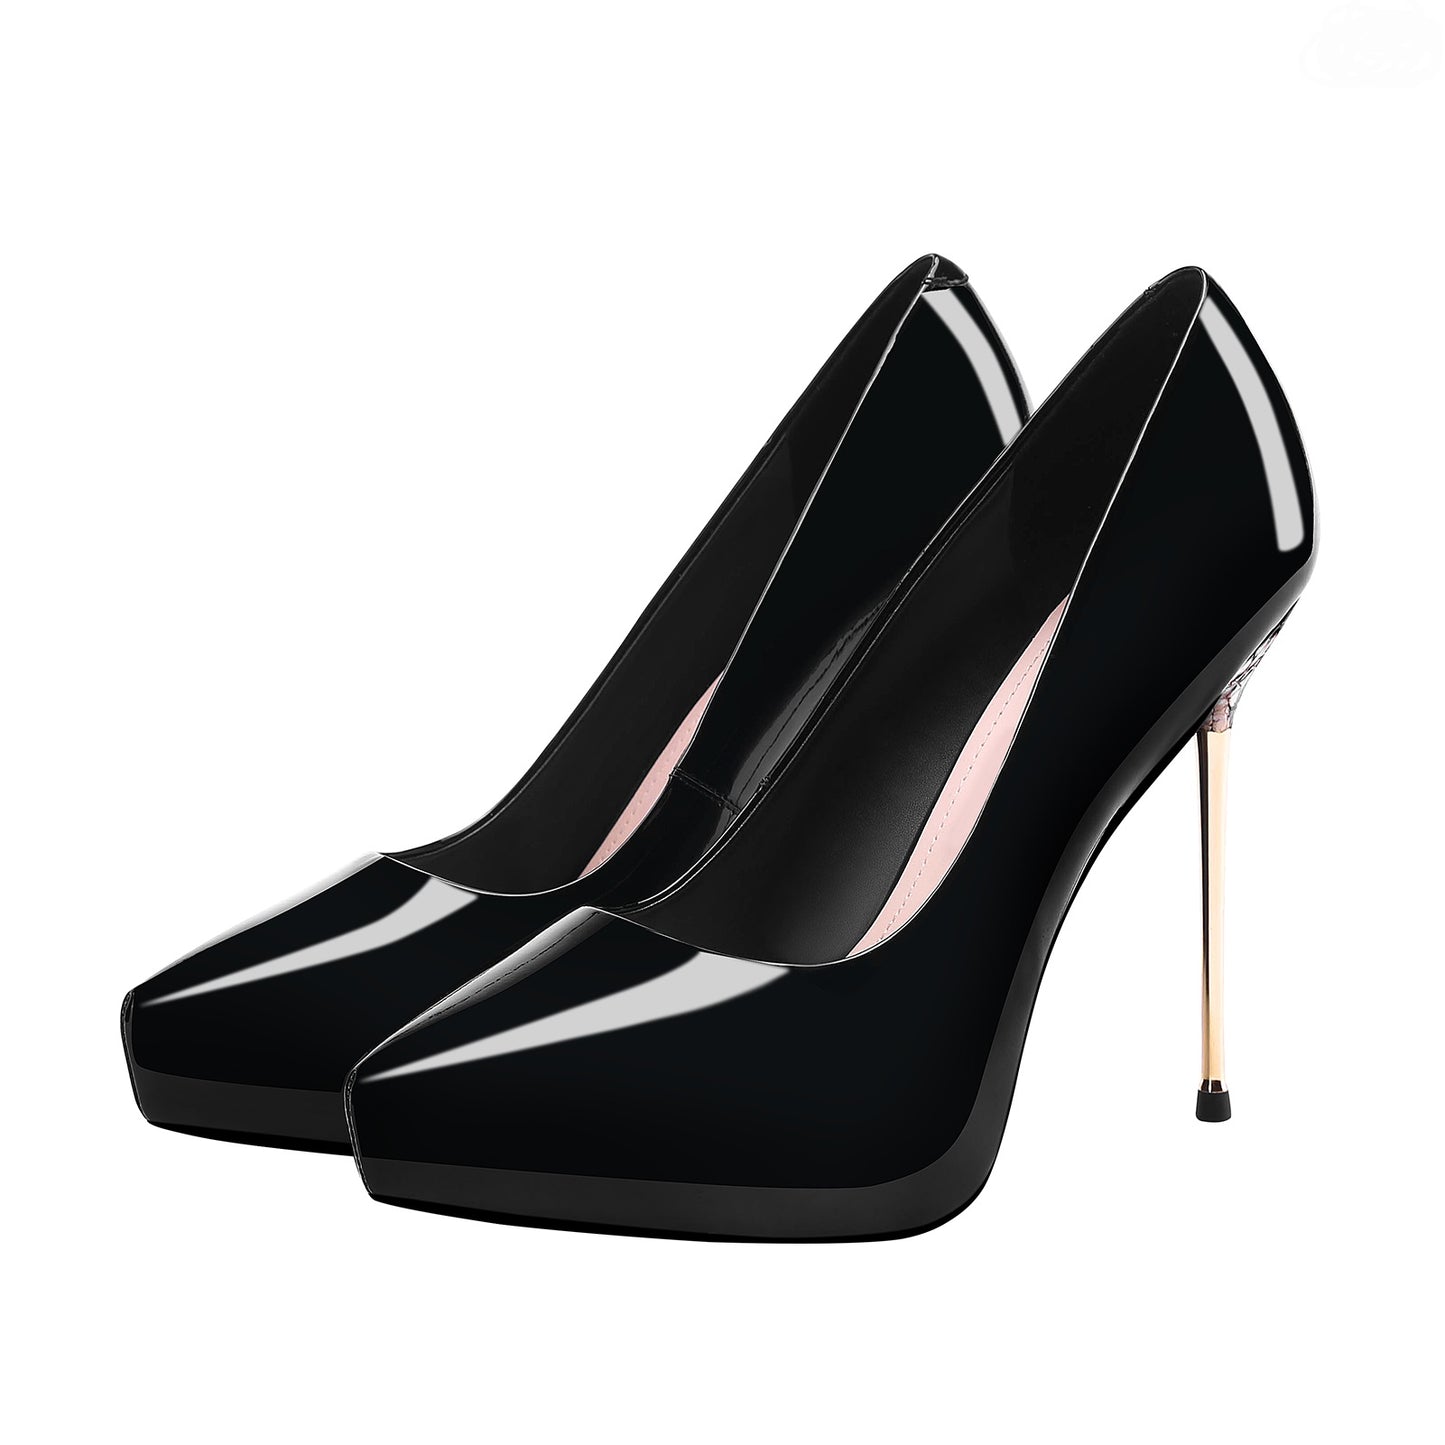 Women's Dressy Comfortable Platform High Heel Pumps Shoes with Patent Leather